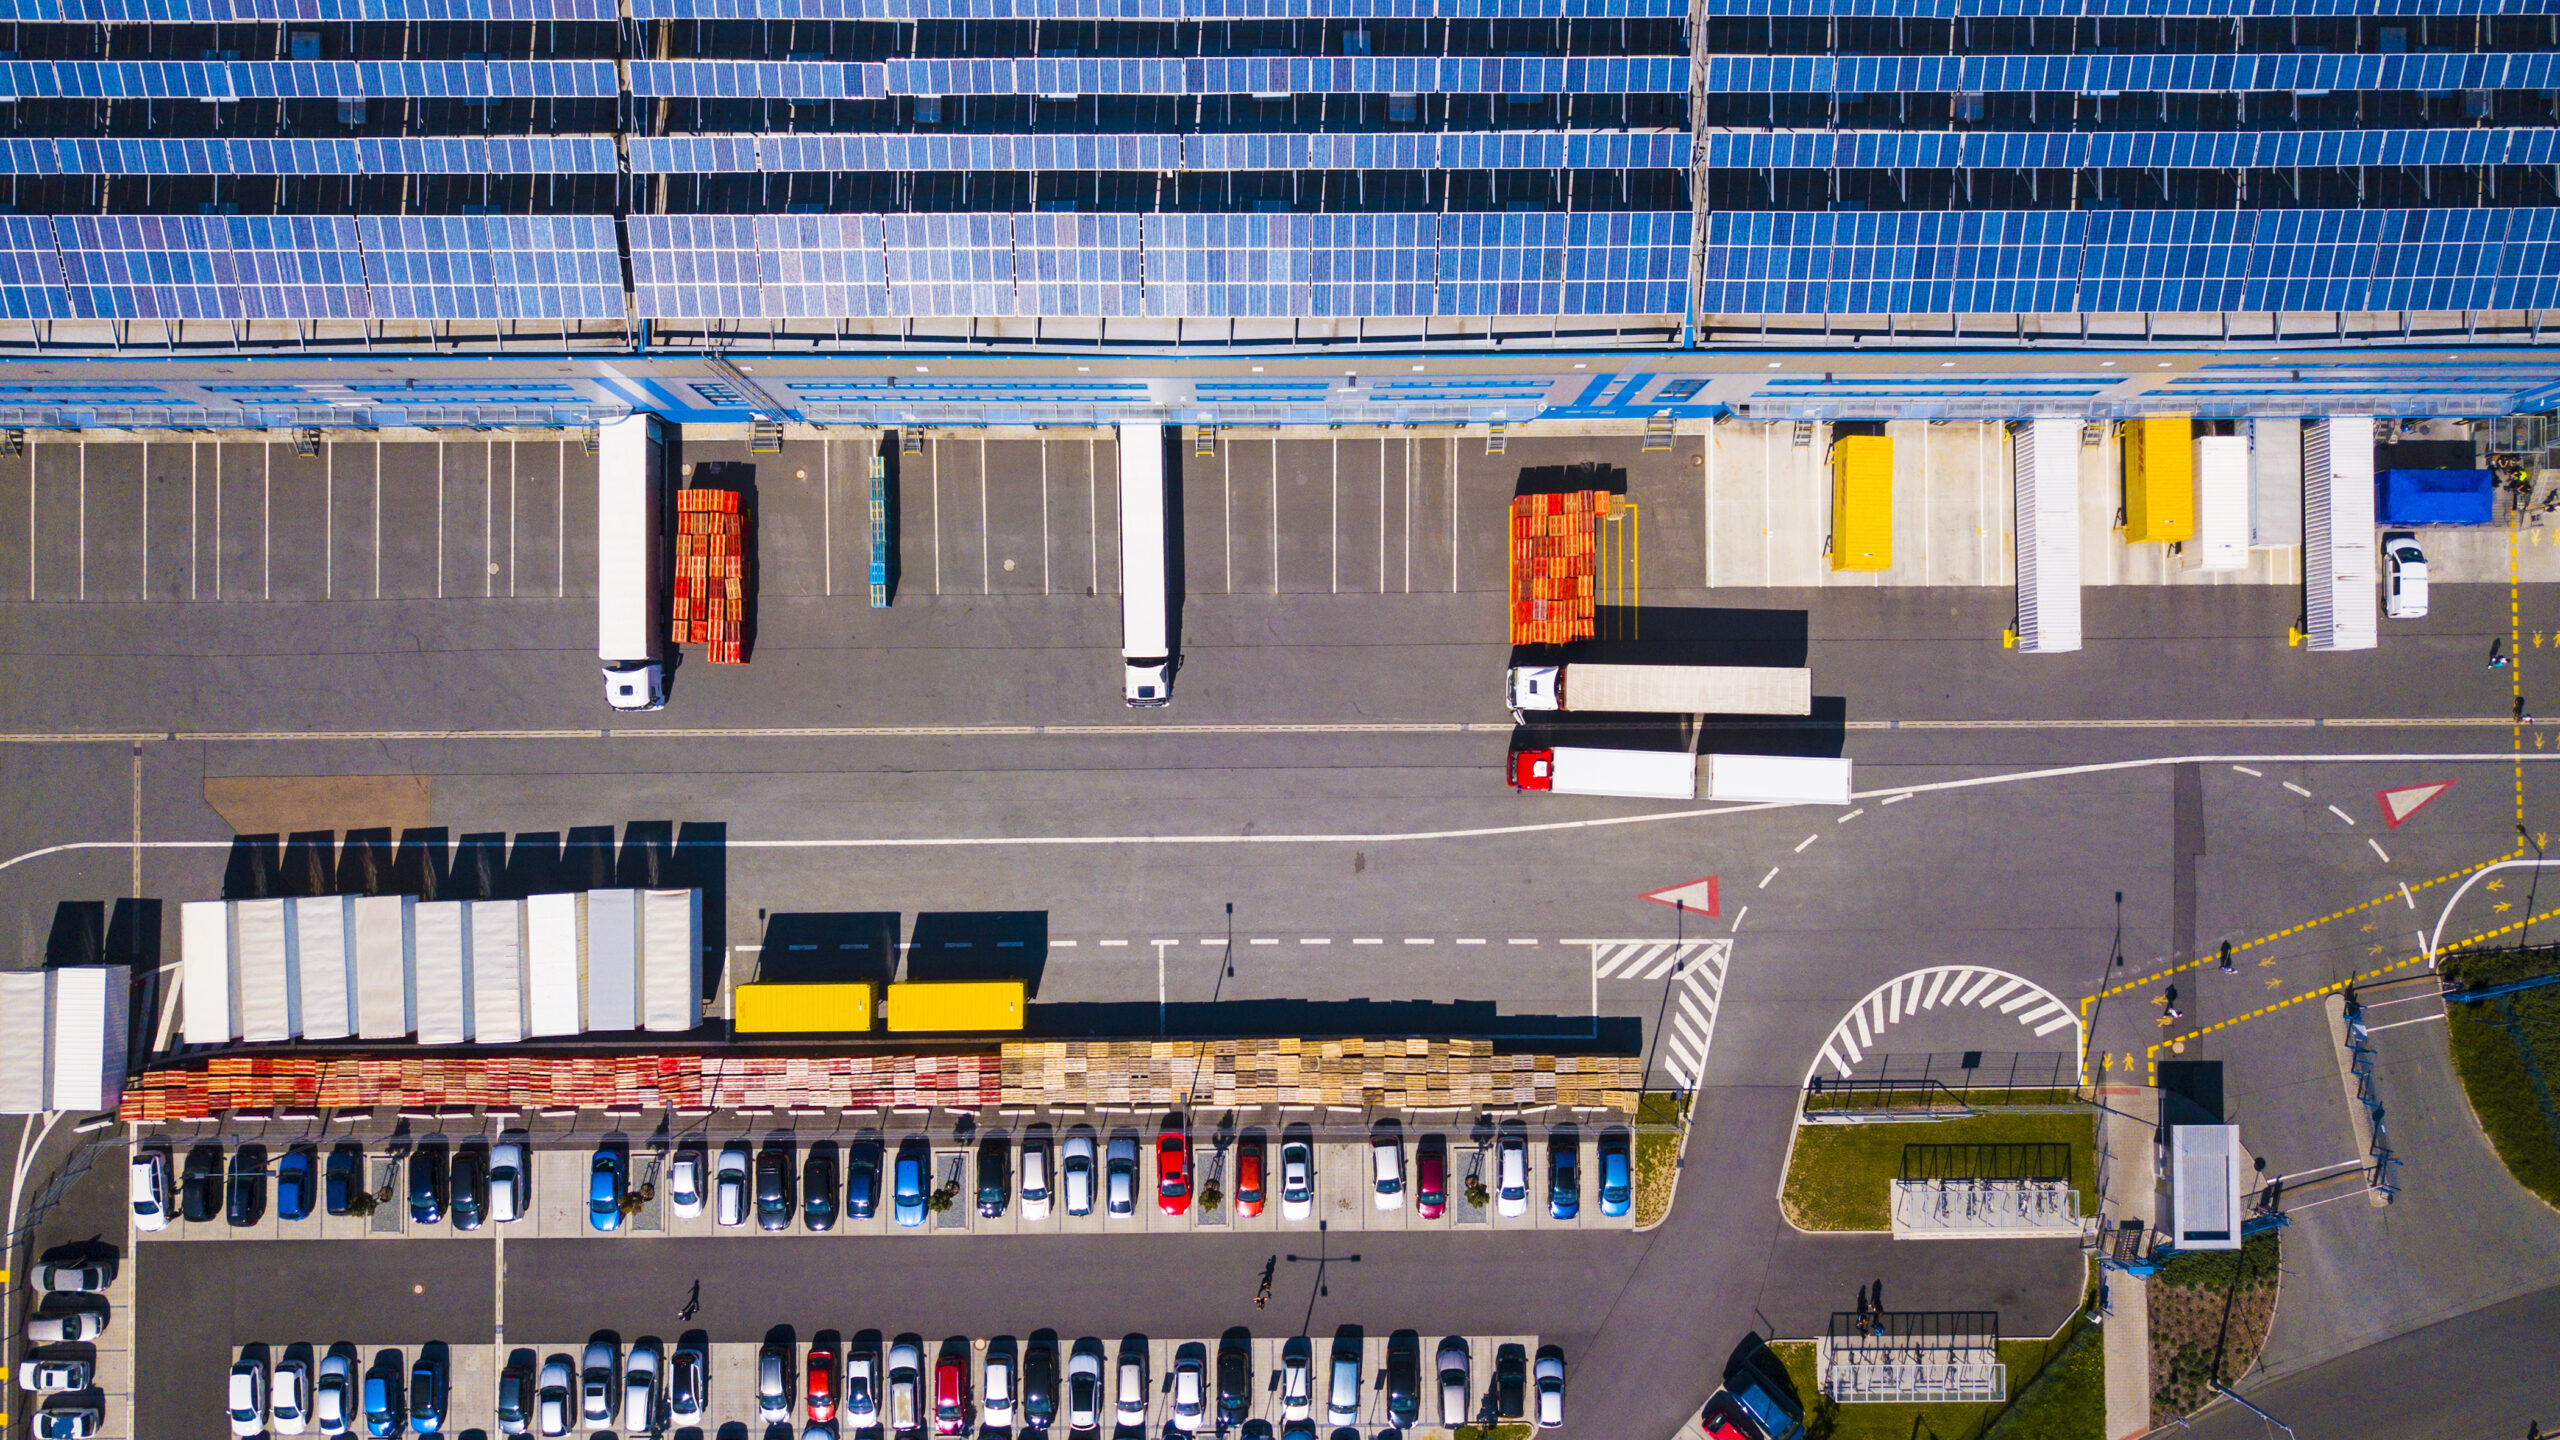 Aerial view of a solar panel covered roof of a distribution centre warehouse with adjacent truck loading bays, office block, and car parking area